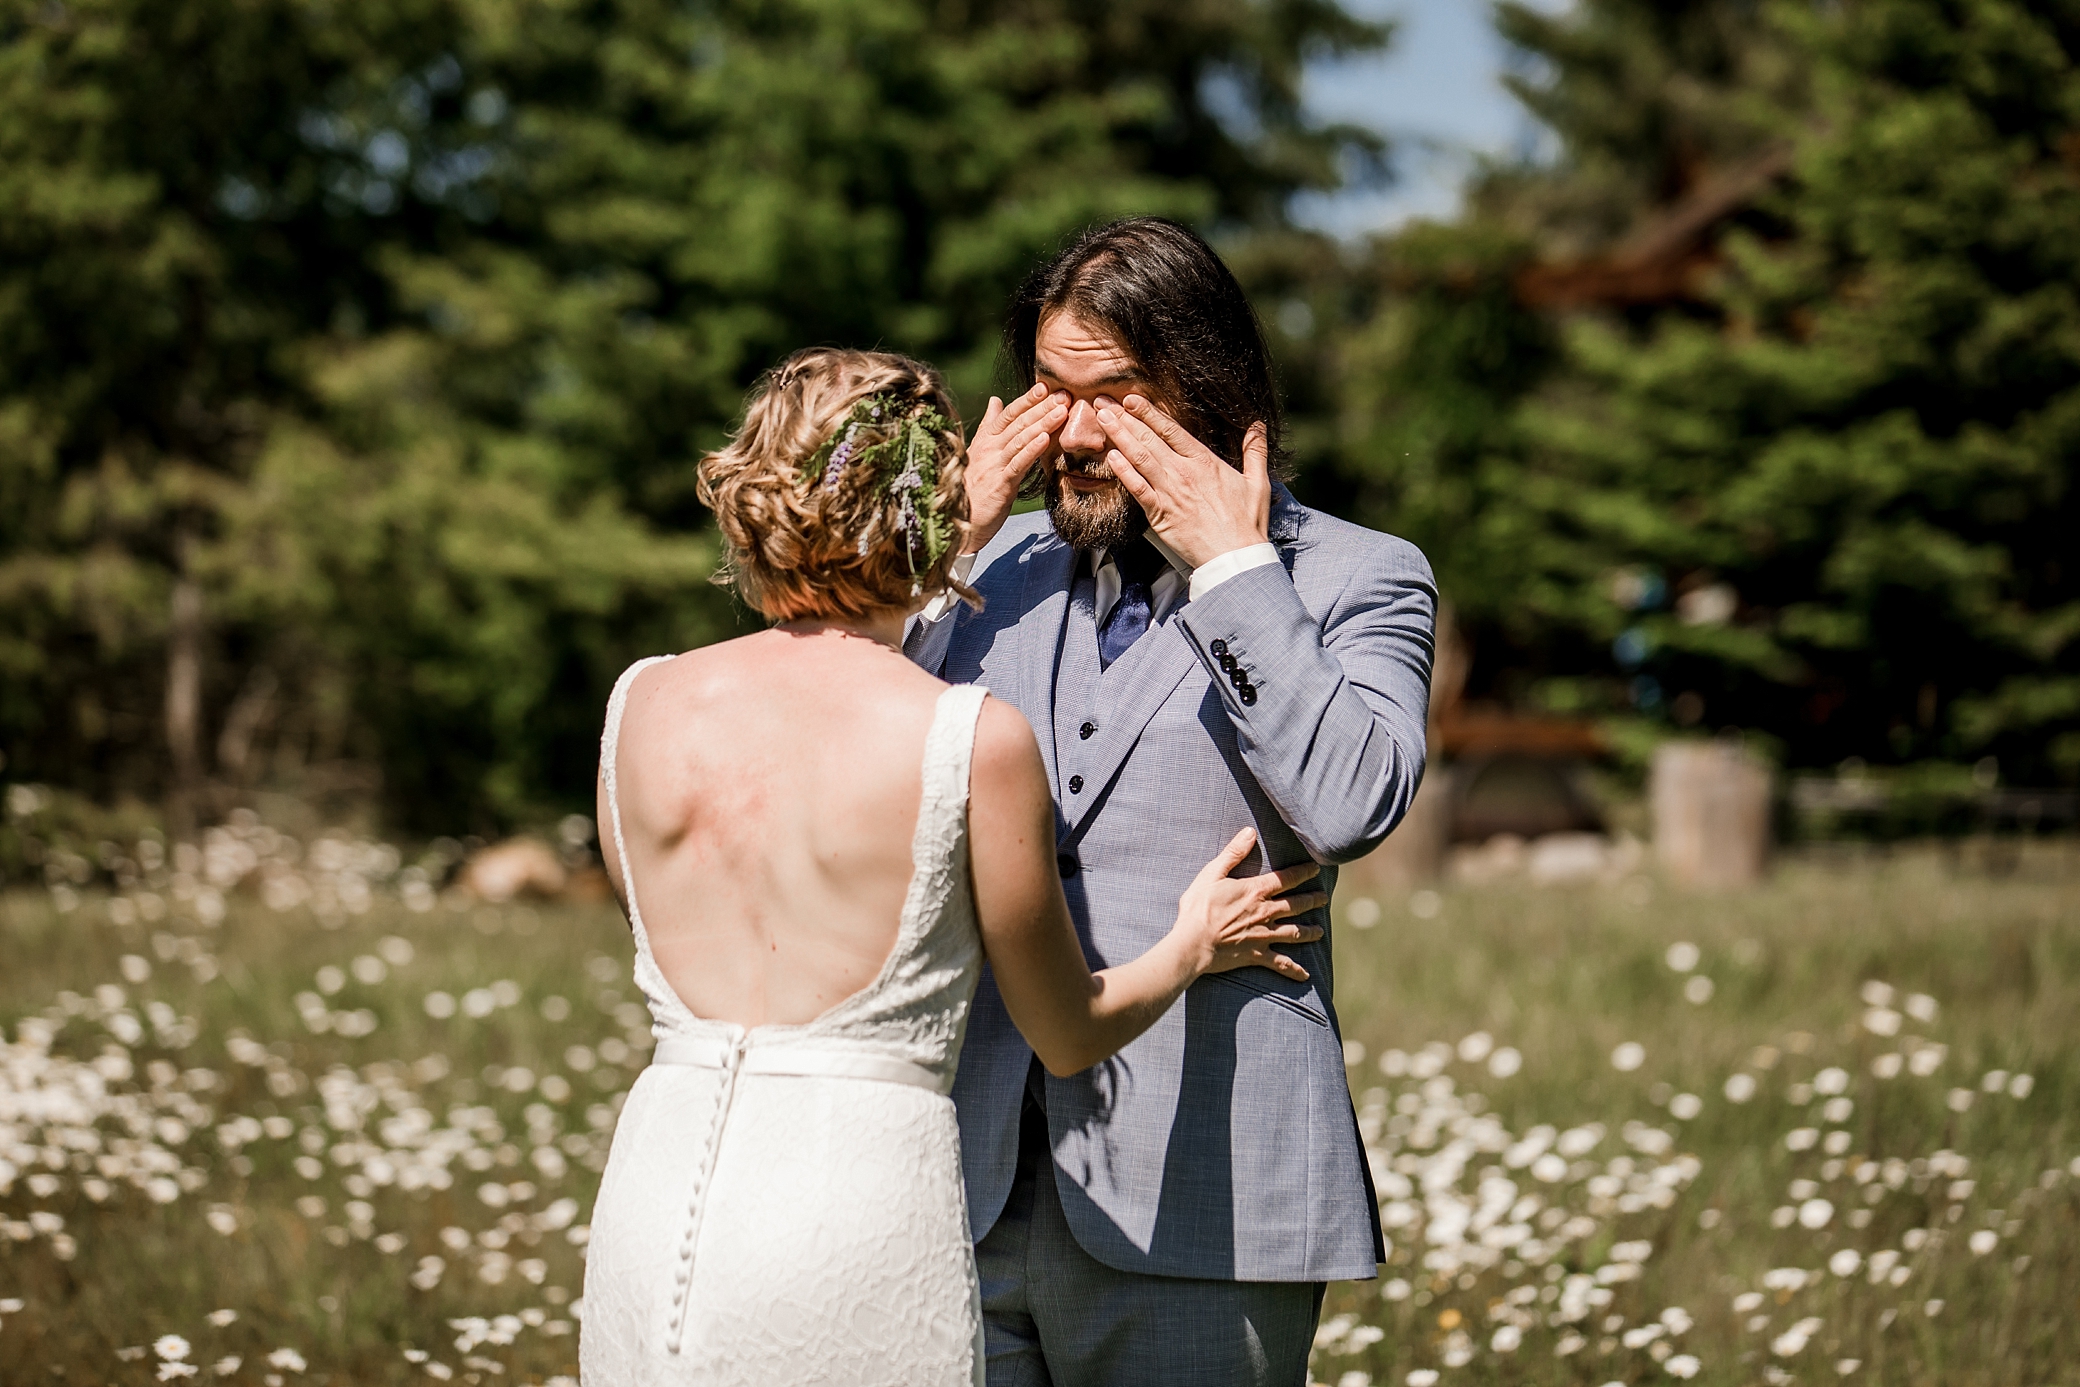 Emotional first look between bride and groom at Olympic National Park Wedding | Megan Montalvo Photography 